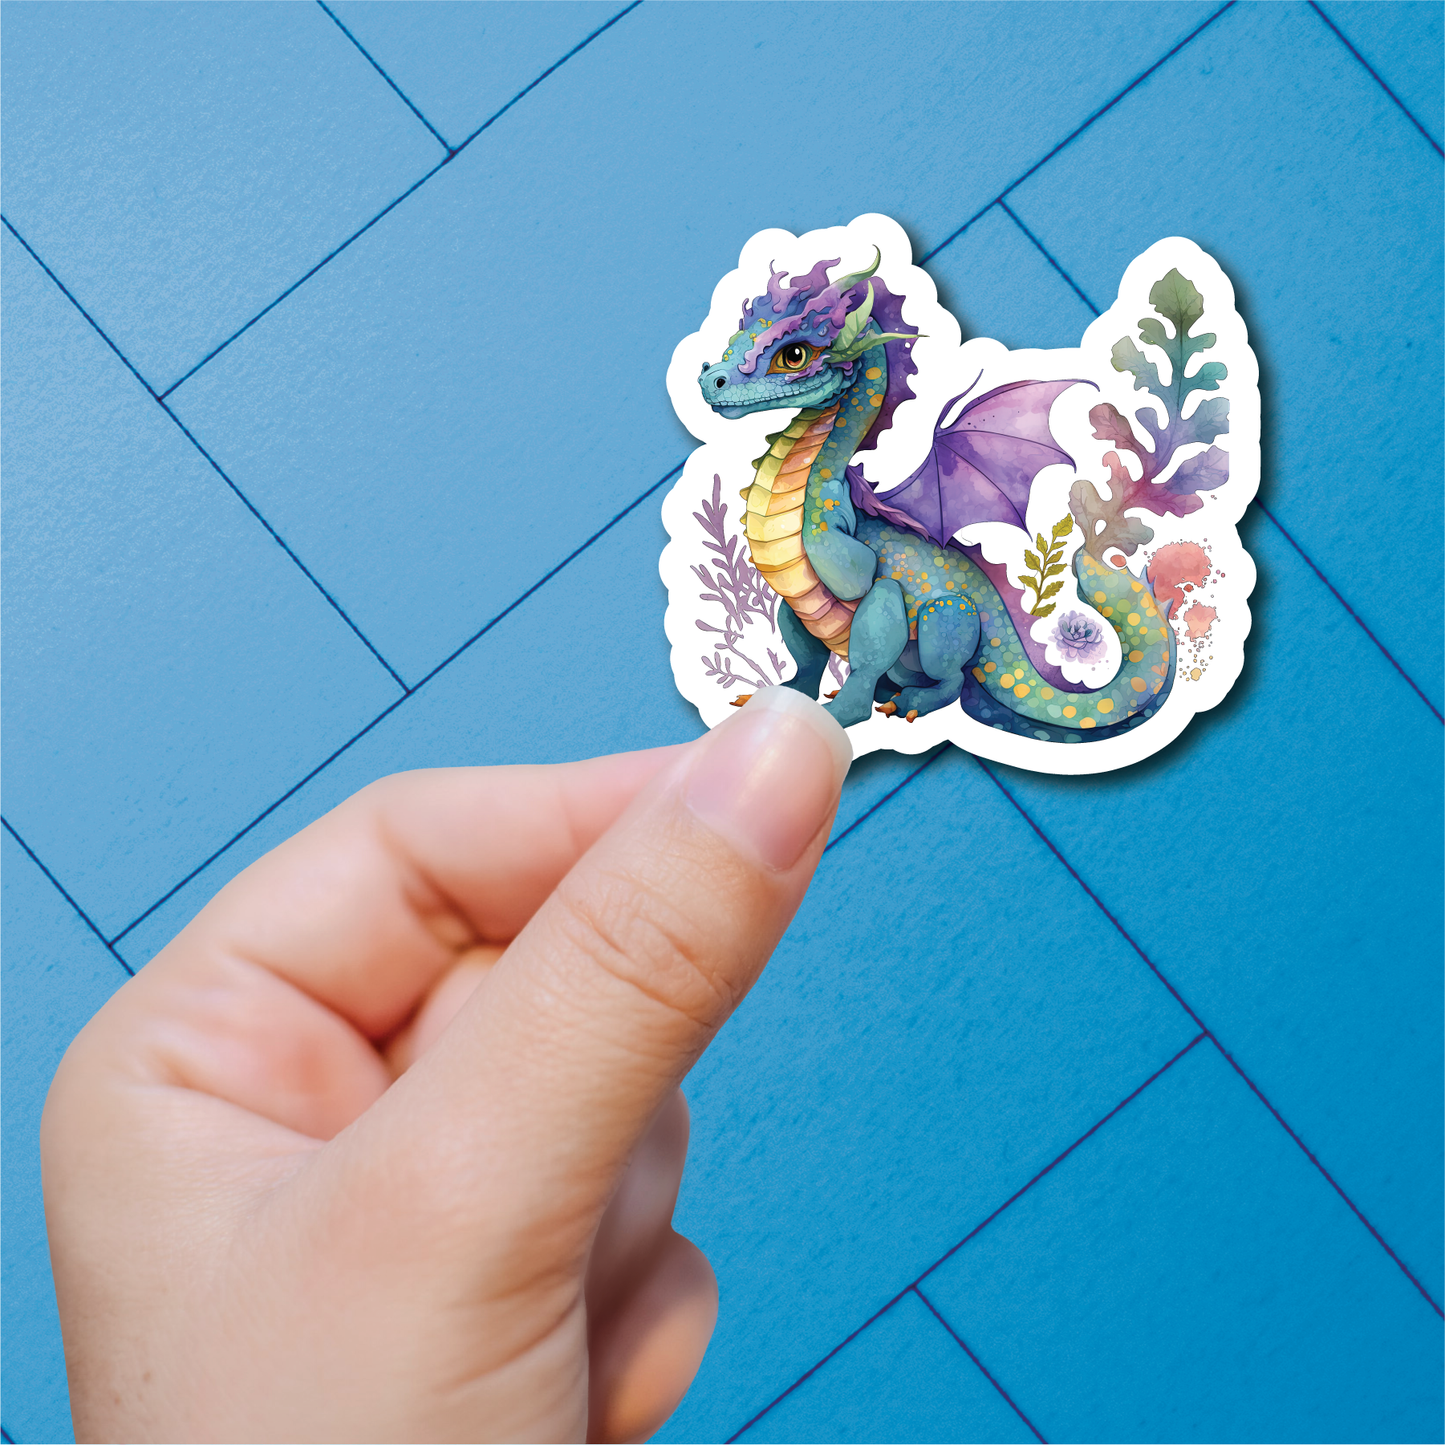 Fantastic Dragons - Full Color Vinyl Stickers (SHIPS IN 3-7 BUS DAYS)